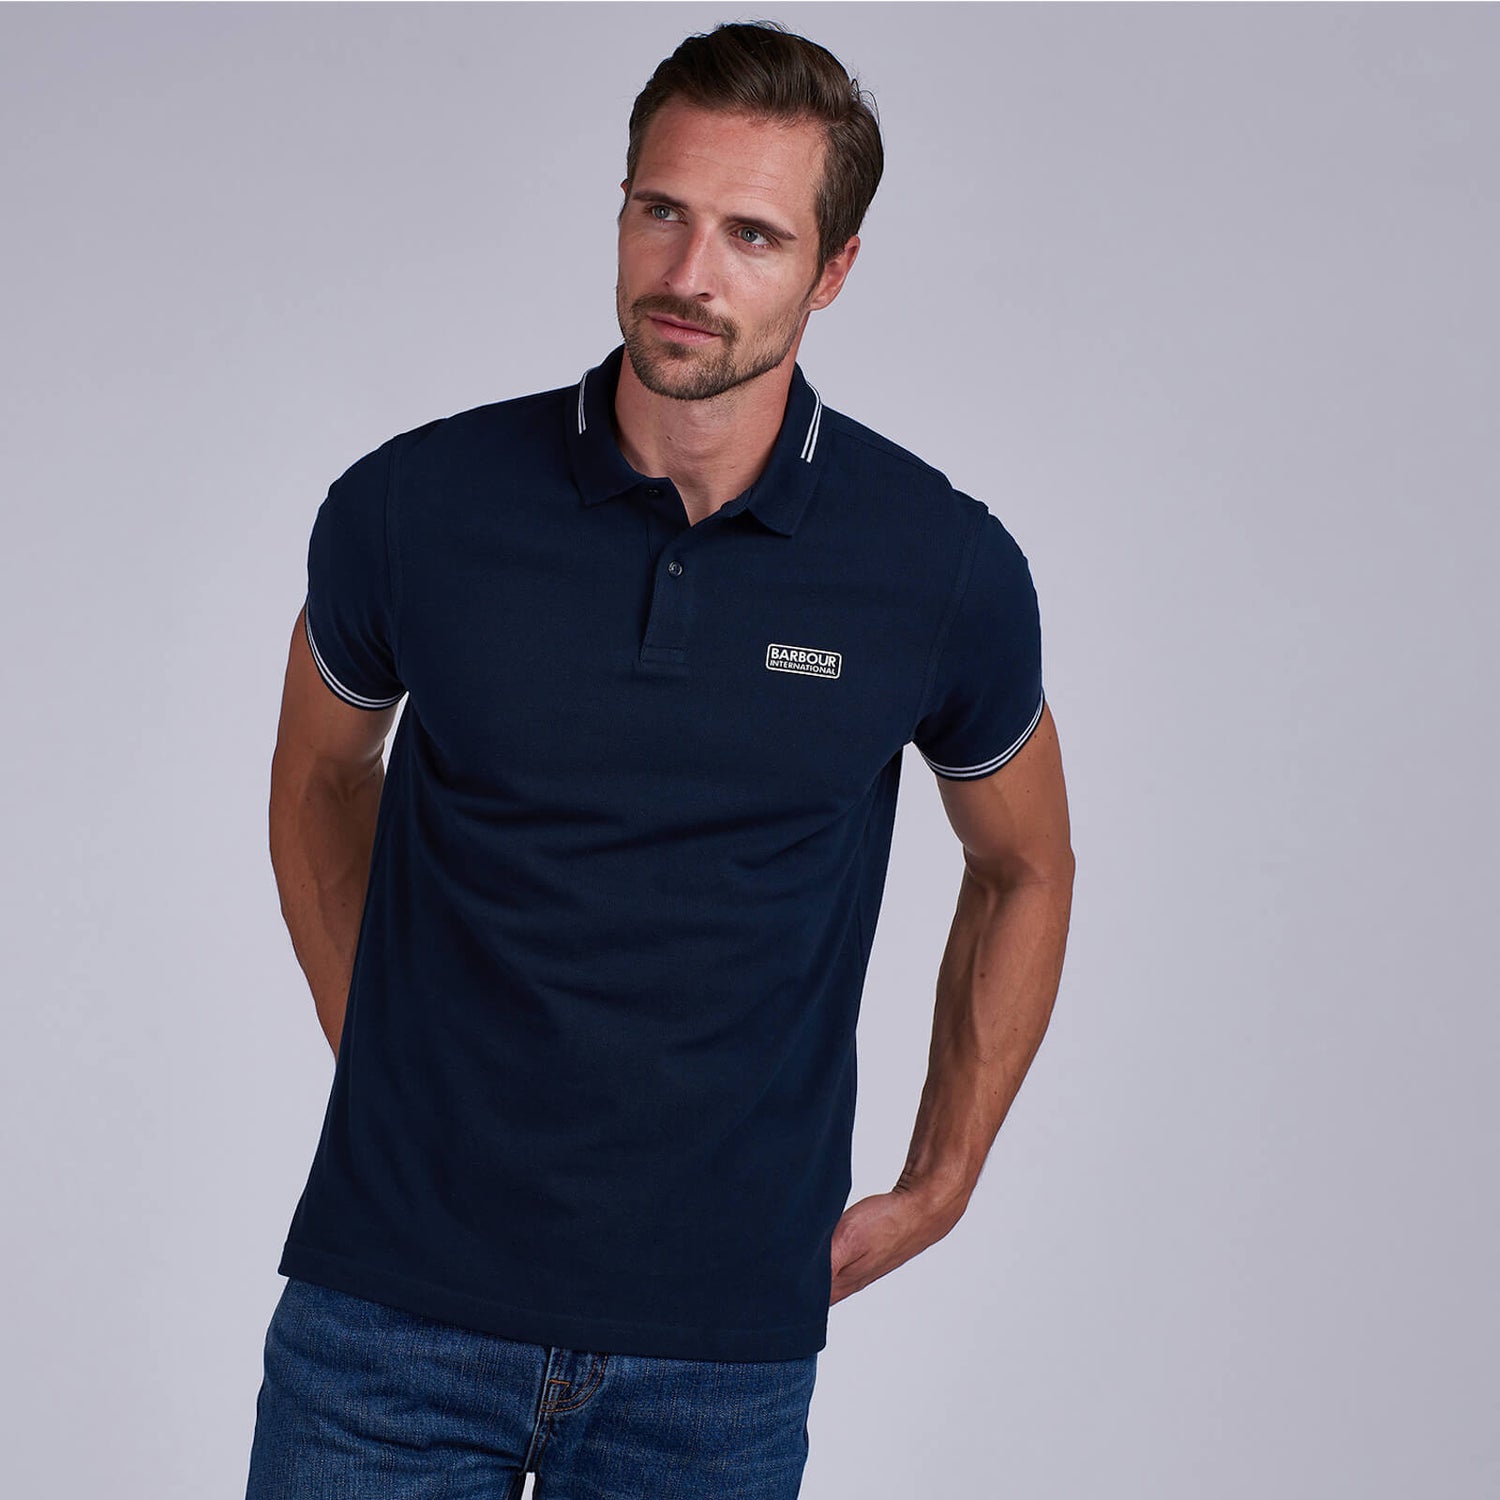 Barbour International Men's Essential Tipped Polo Shirt - Navy - S